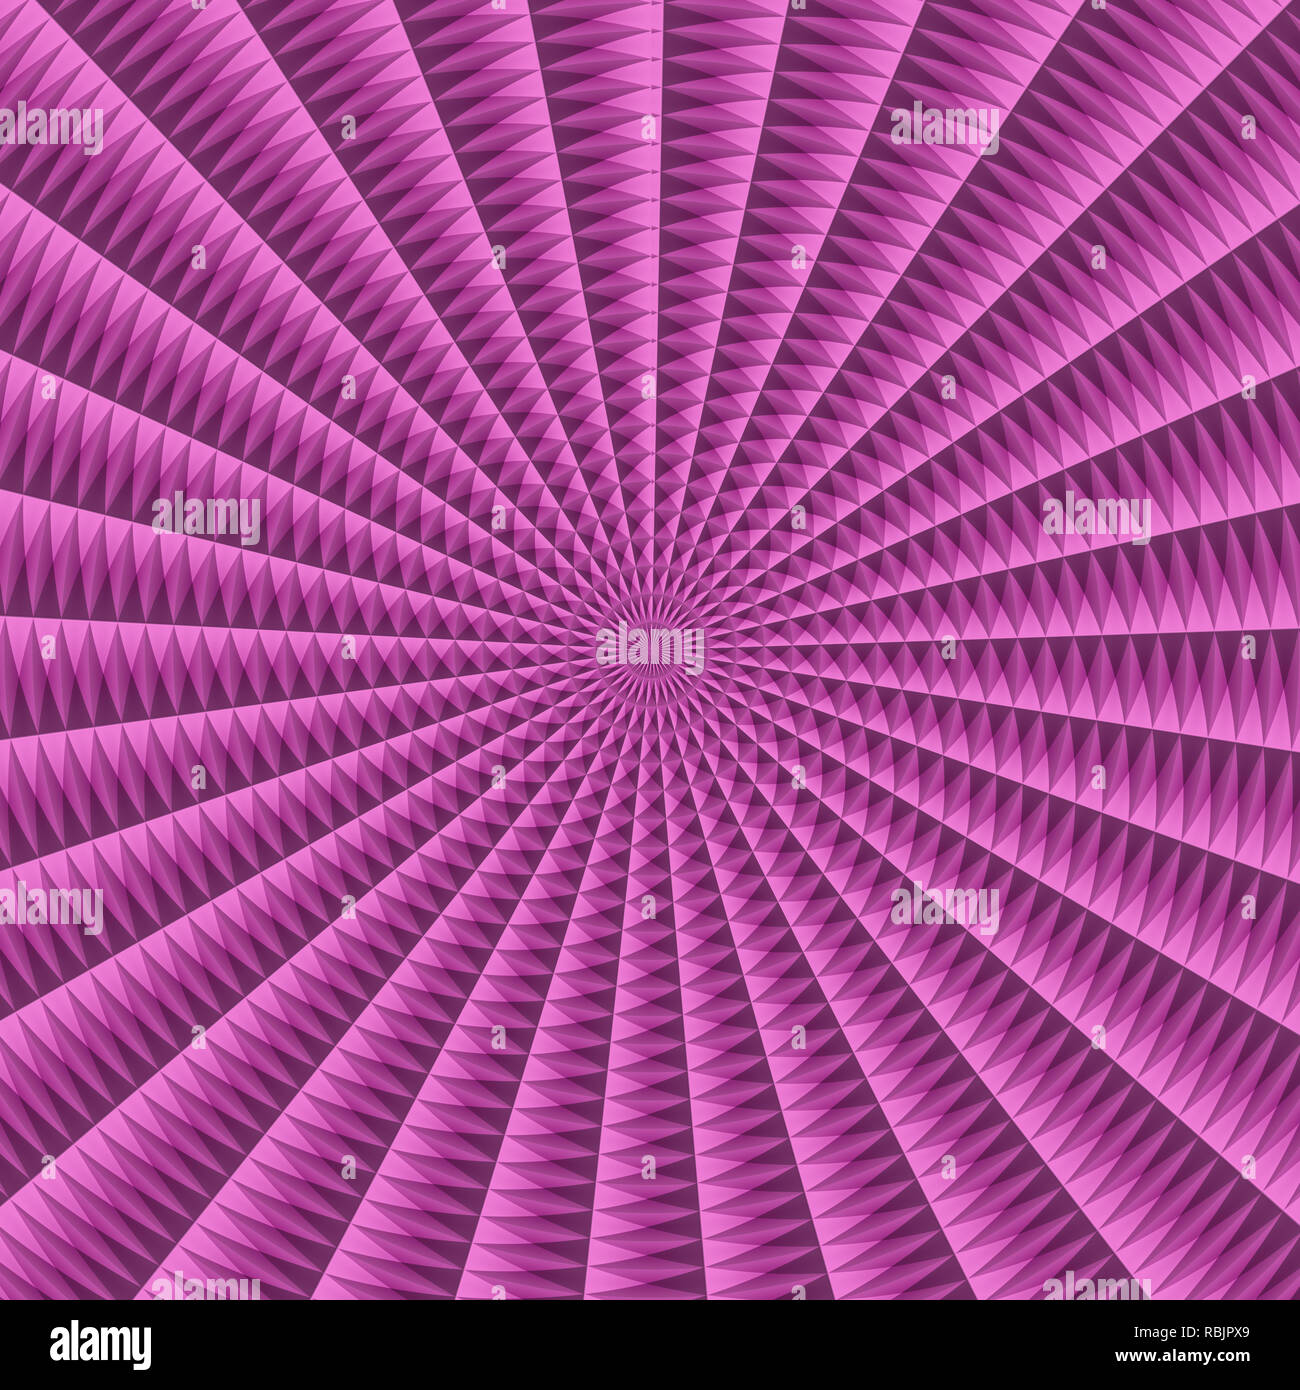 Lilac colored Radial abstract three-dimensional background pattern. Hallucinogenic background texture. Stock Photo